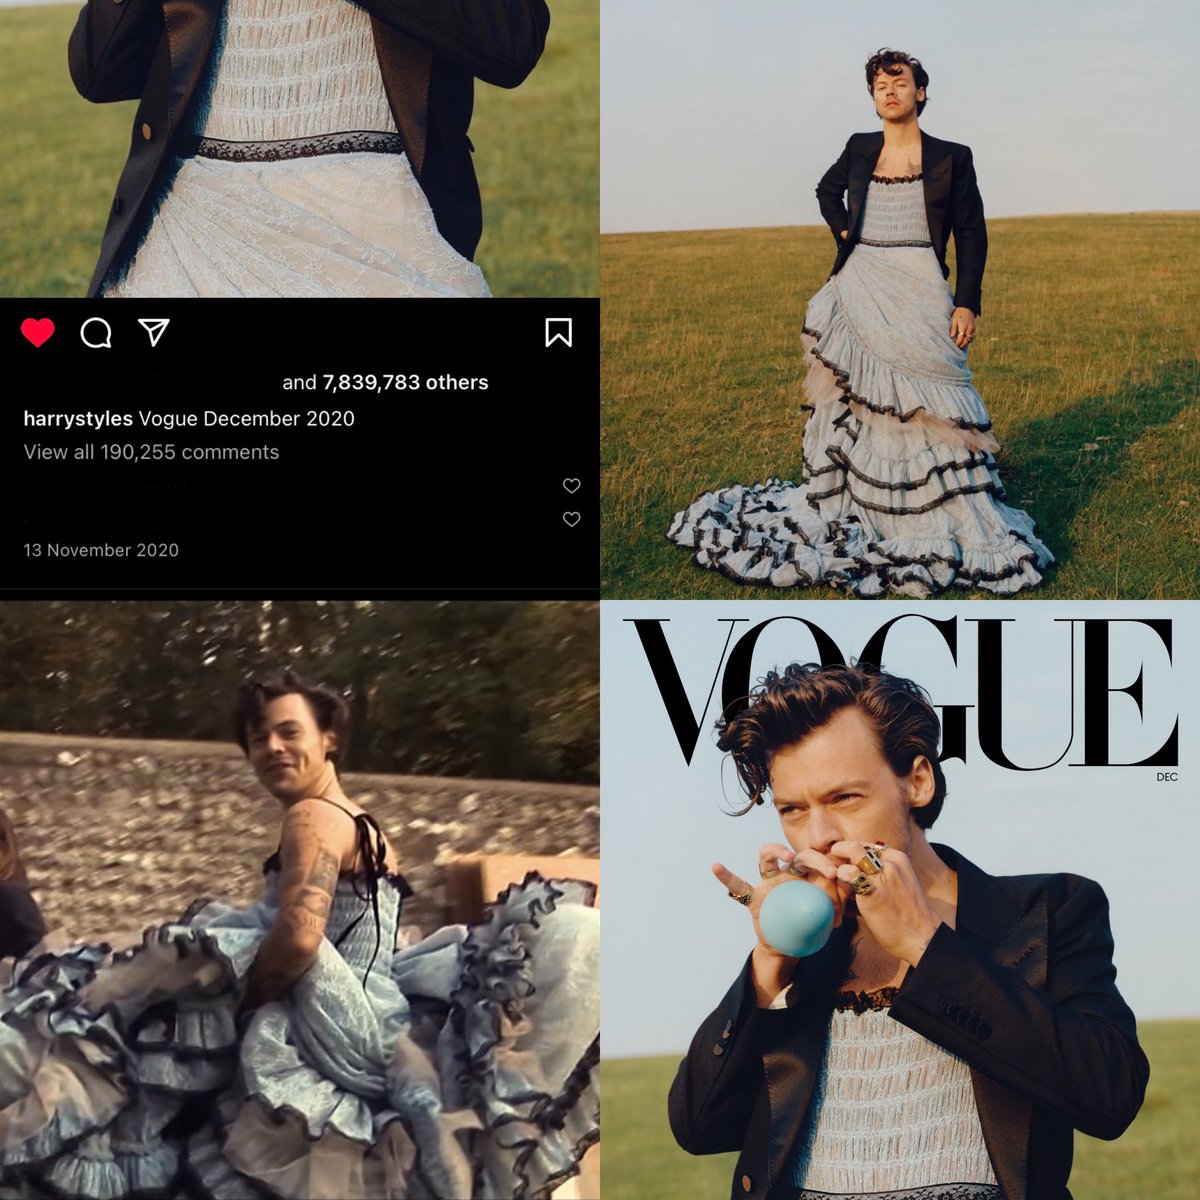 Two years since Harry being the first man to be on the cover of VOGUE!!